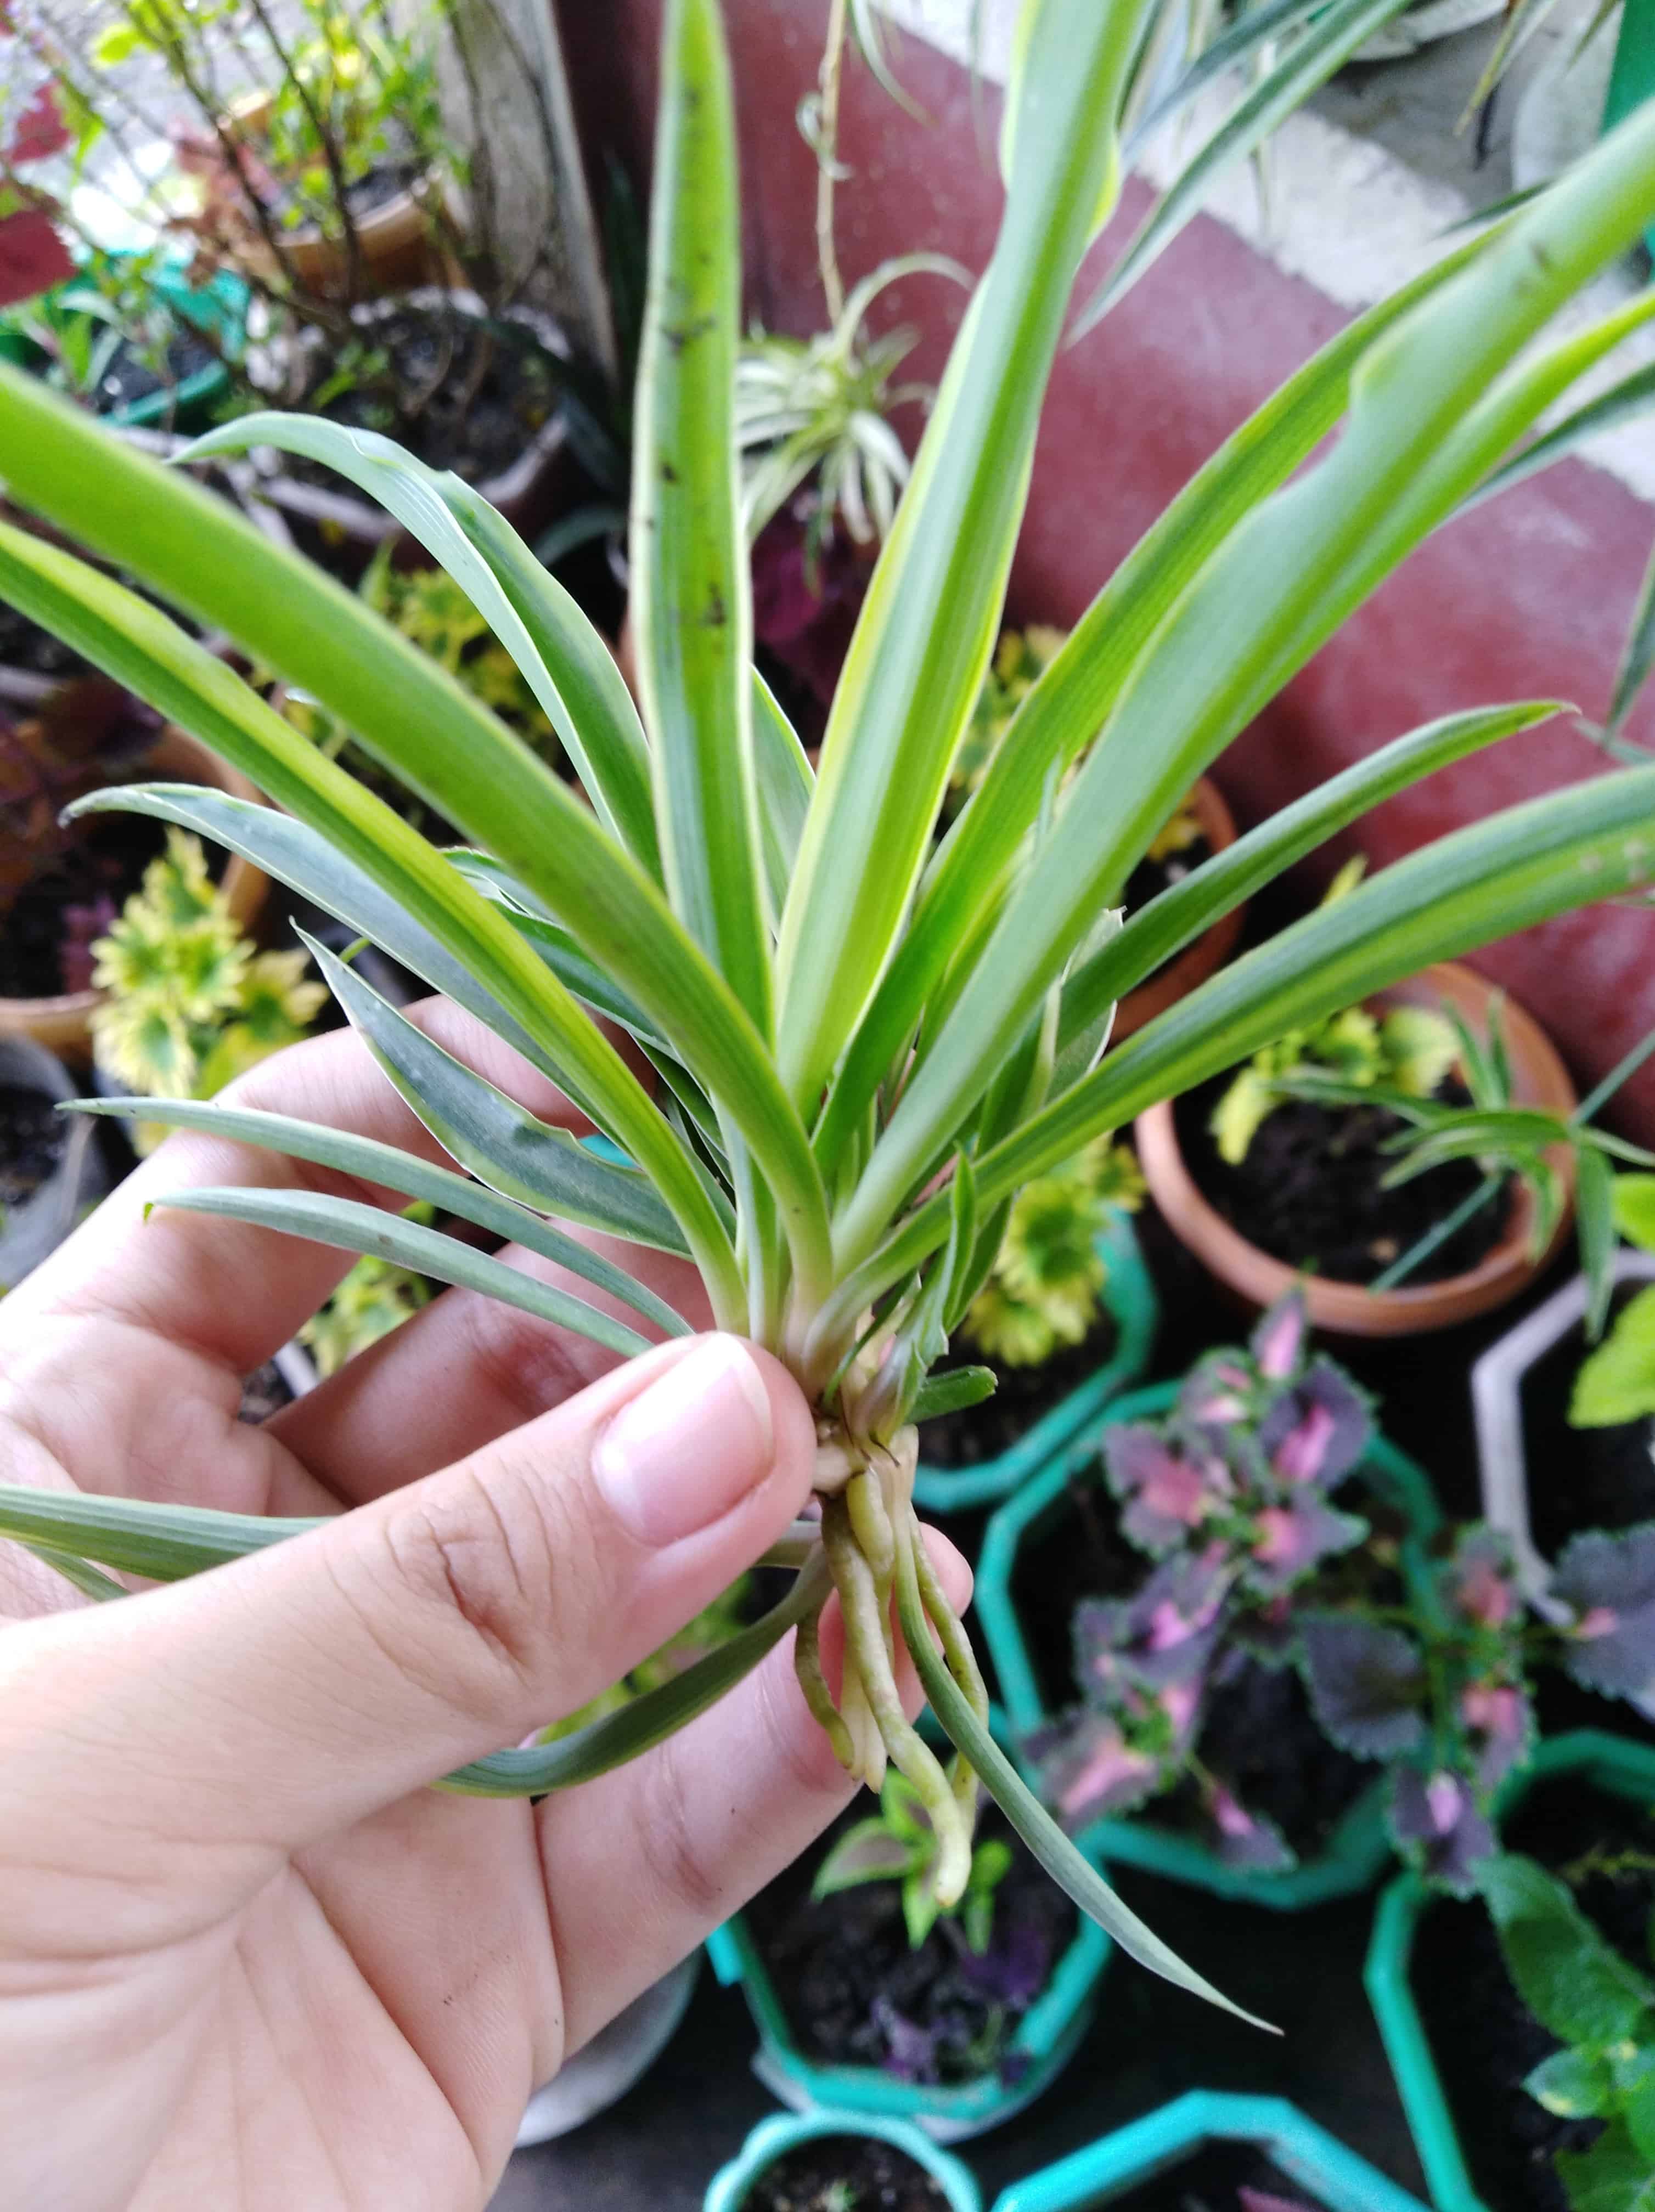 A Spider plant offset separated/cut from its mother plant